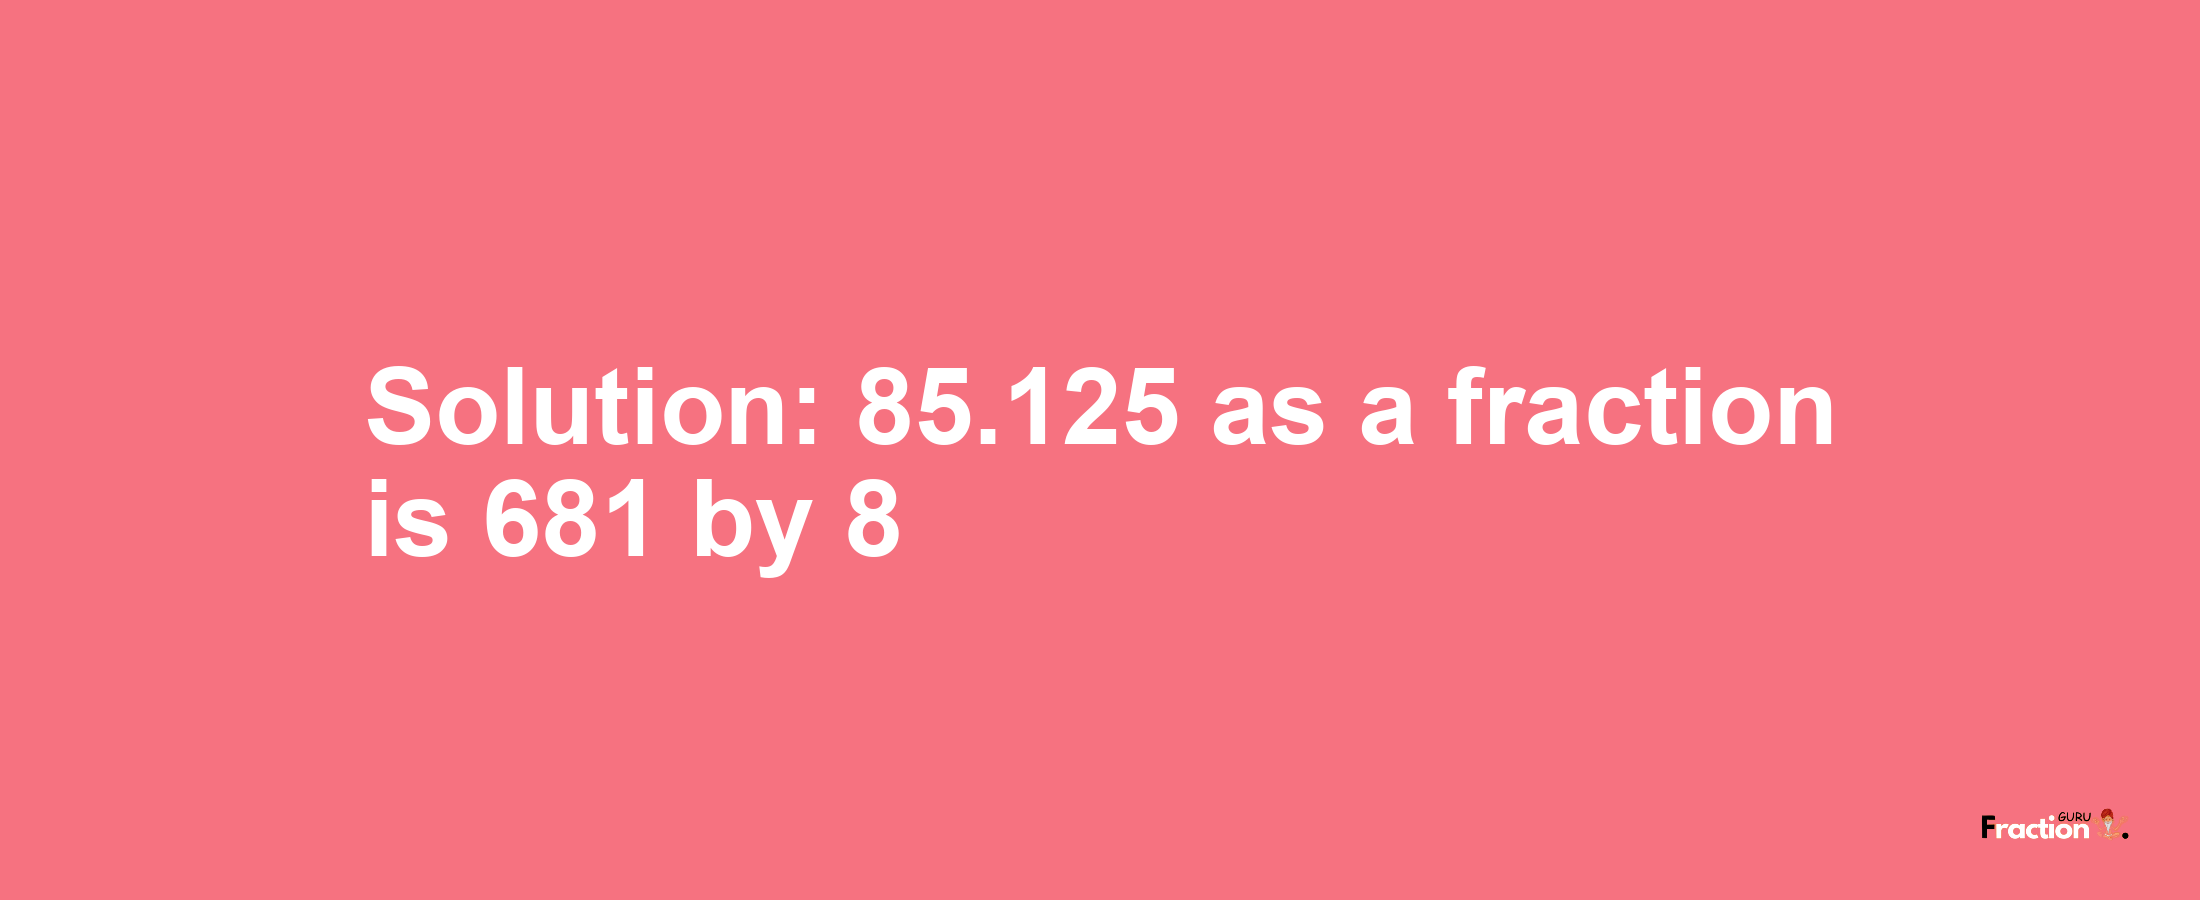 Solution:85.125 as a fraction is 681/8